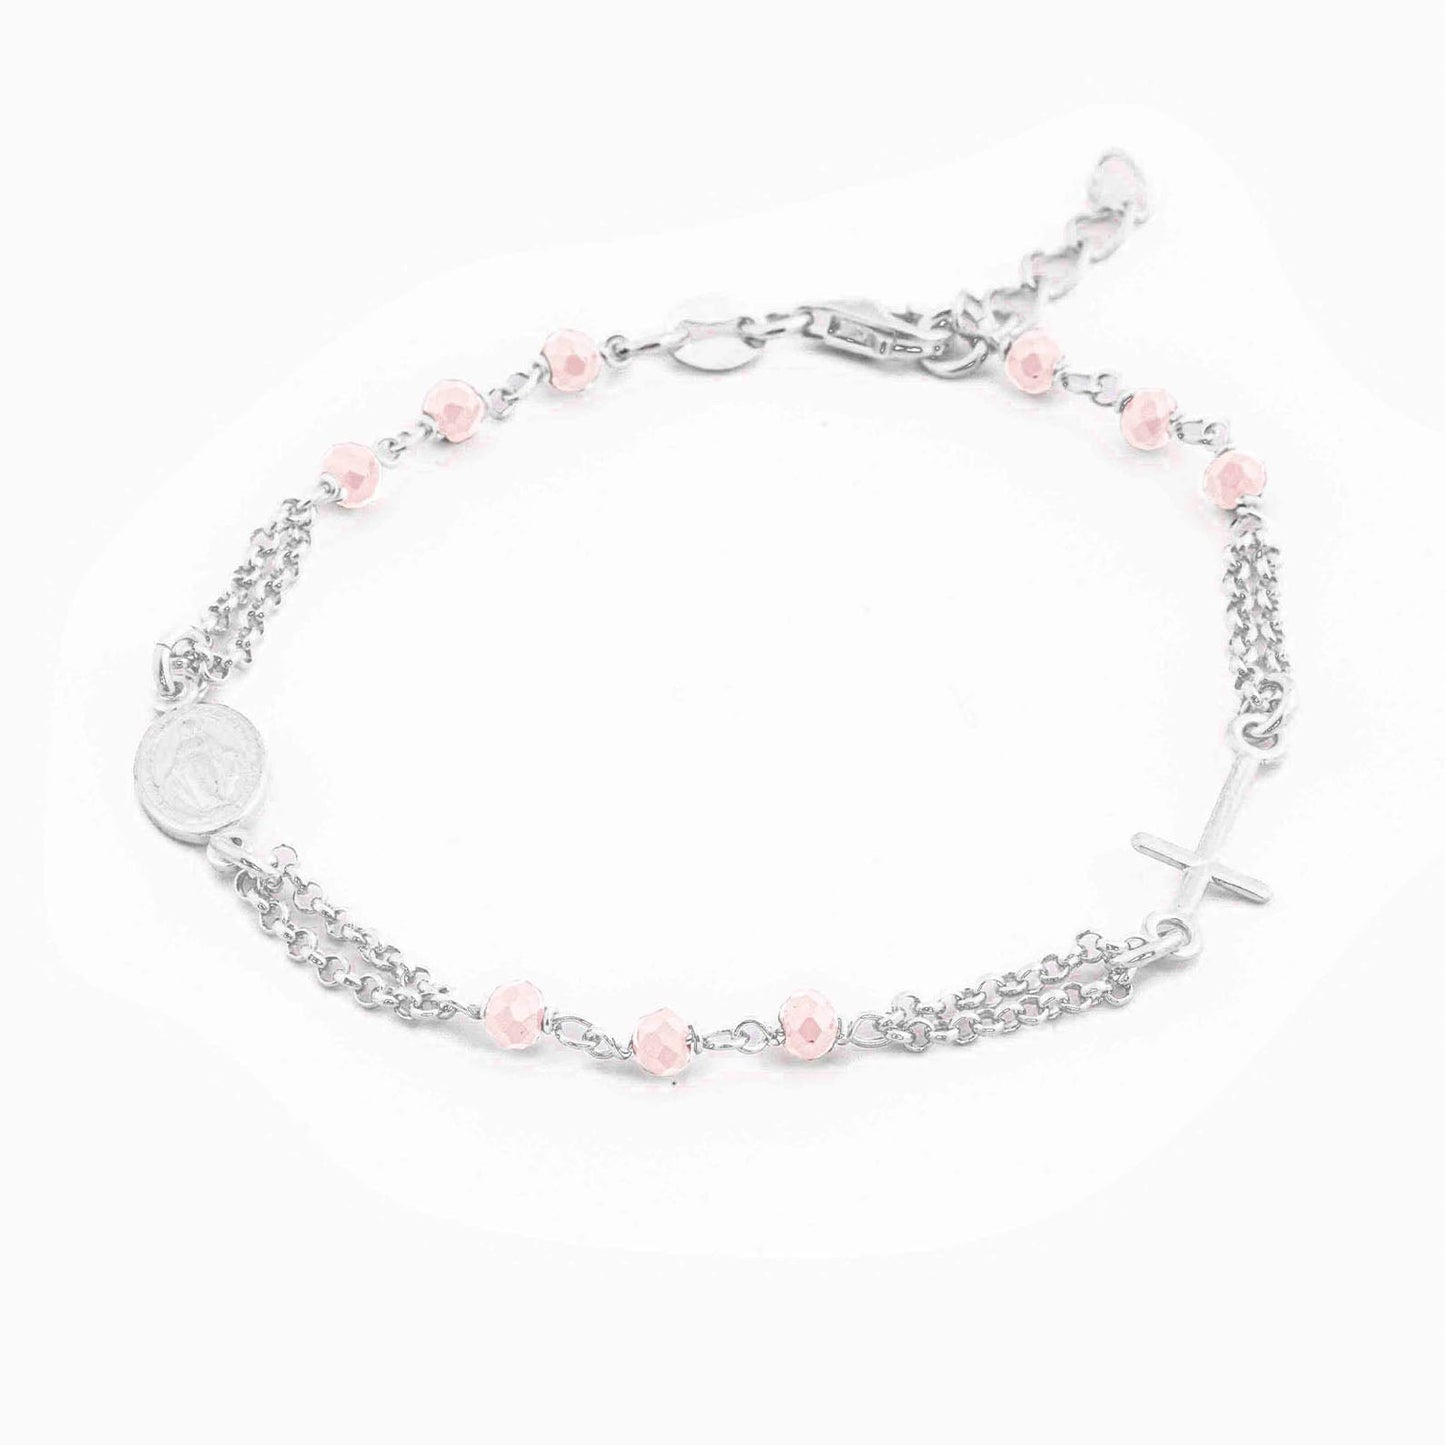 MONDO CATTOLICO Prayer Beads Rhodium / Cm 17.5 (6.9 in) / Cm 3 (1.2 in) STERLING SILVER ROSARY BRACELET DOUBLE CHAIN ROSE FACETED BEADS